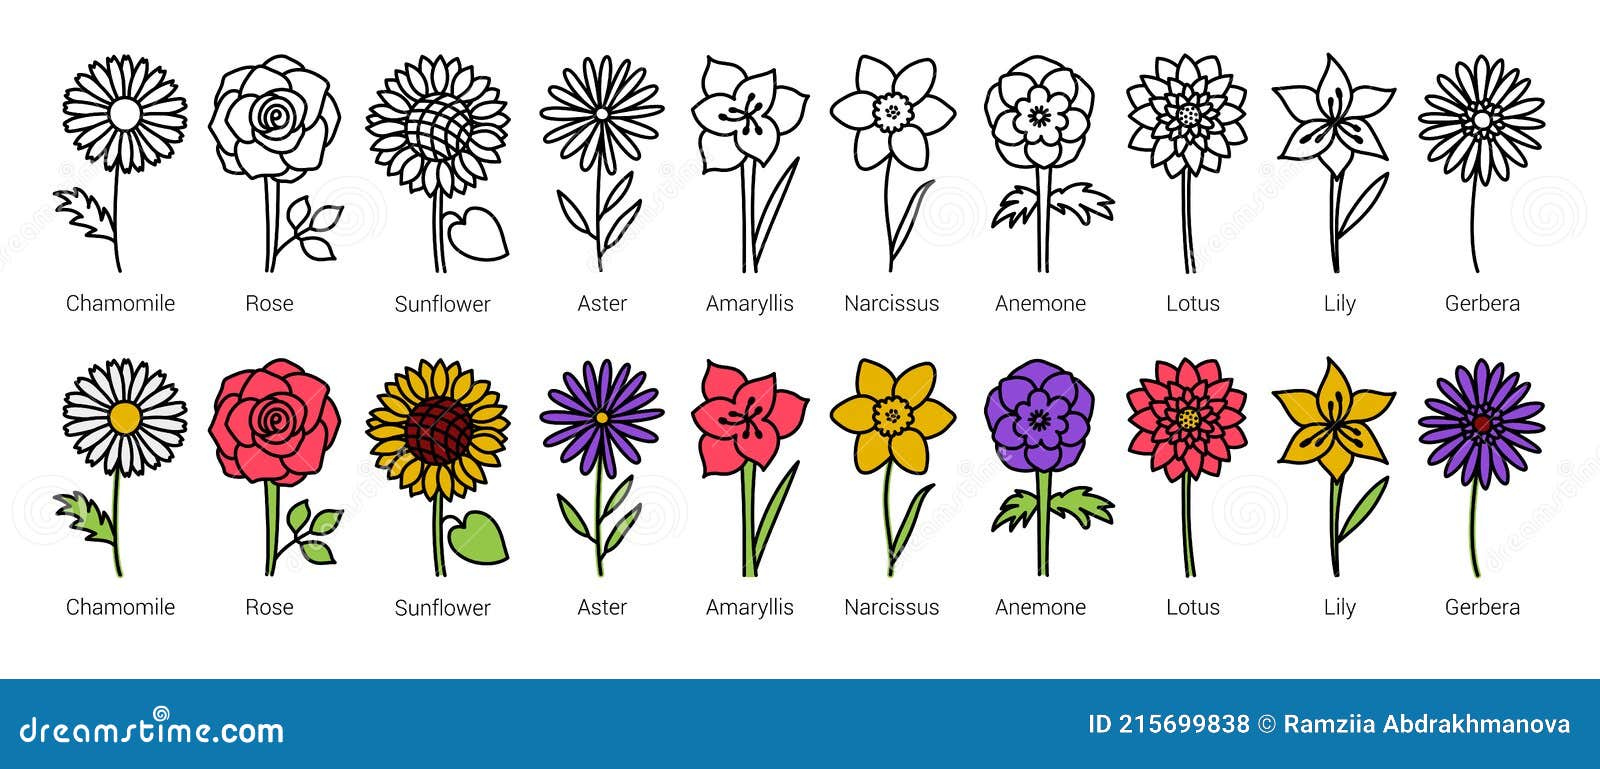 Coloring Pages Teacher: Kinds Of Flowers With Name And Picture : Names ...